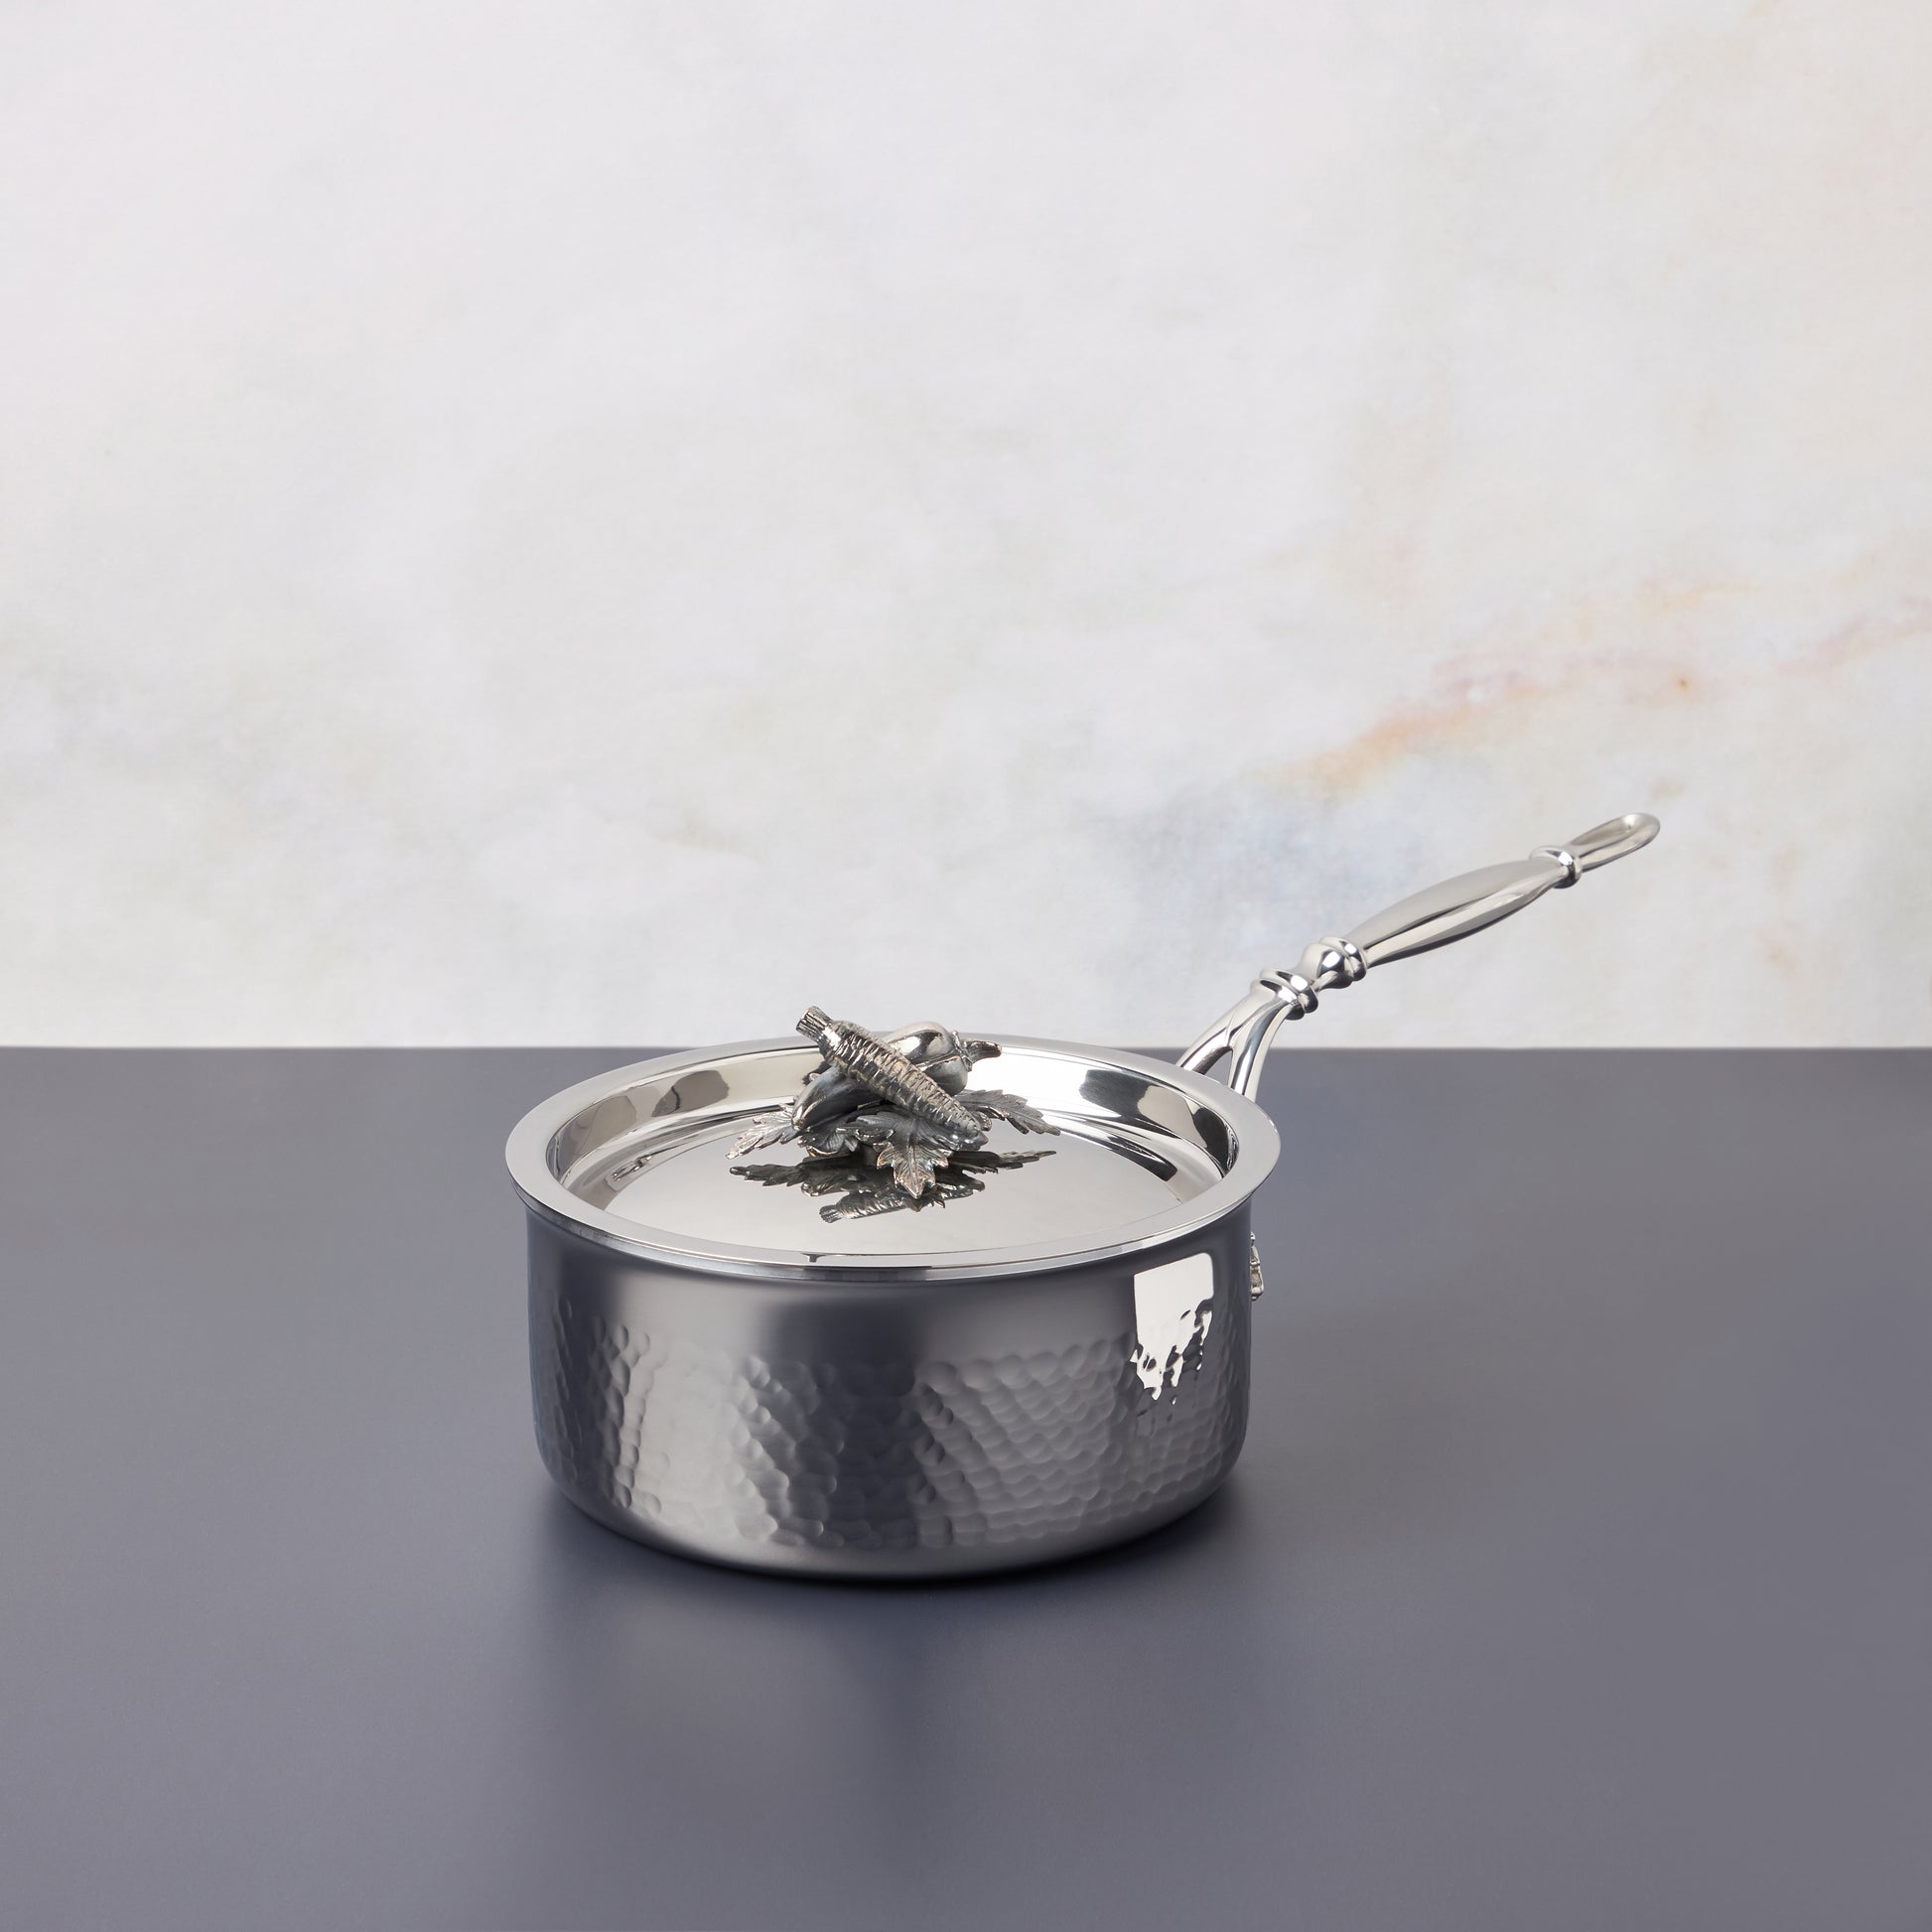 Opus Prima hammered clad stainless steel small saucepan with decorated silver-plated lid knob finial from Ruffoni